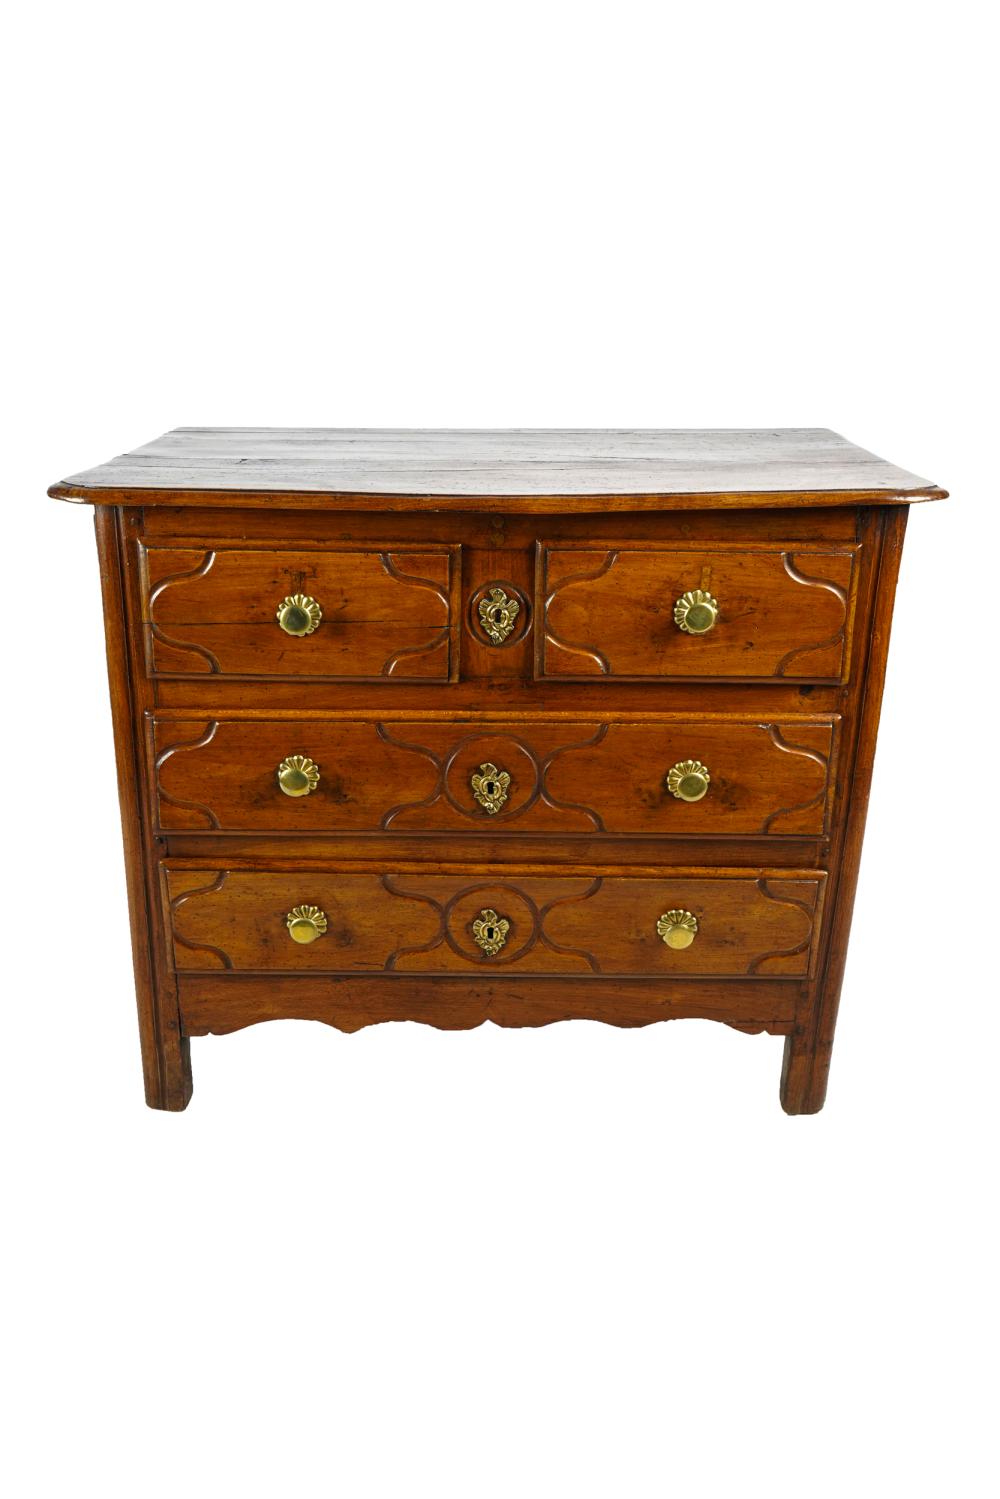 FRENCH PROVINCIAL WALNUT COMMODEwith